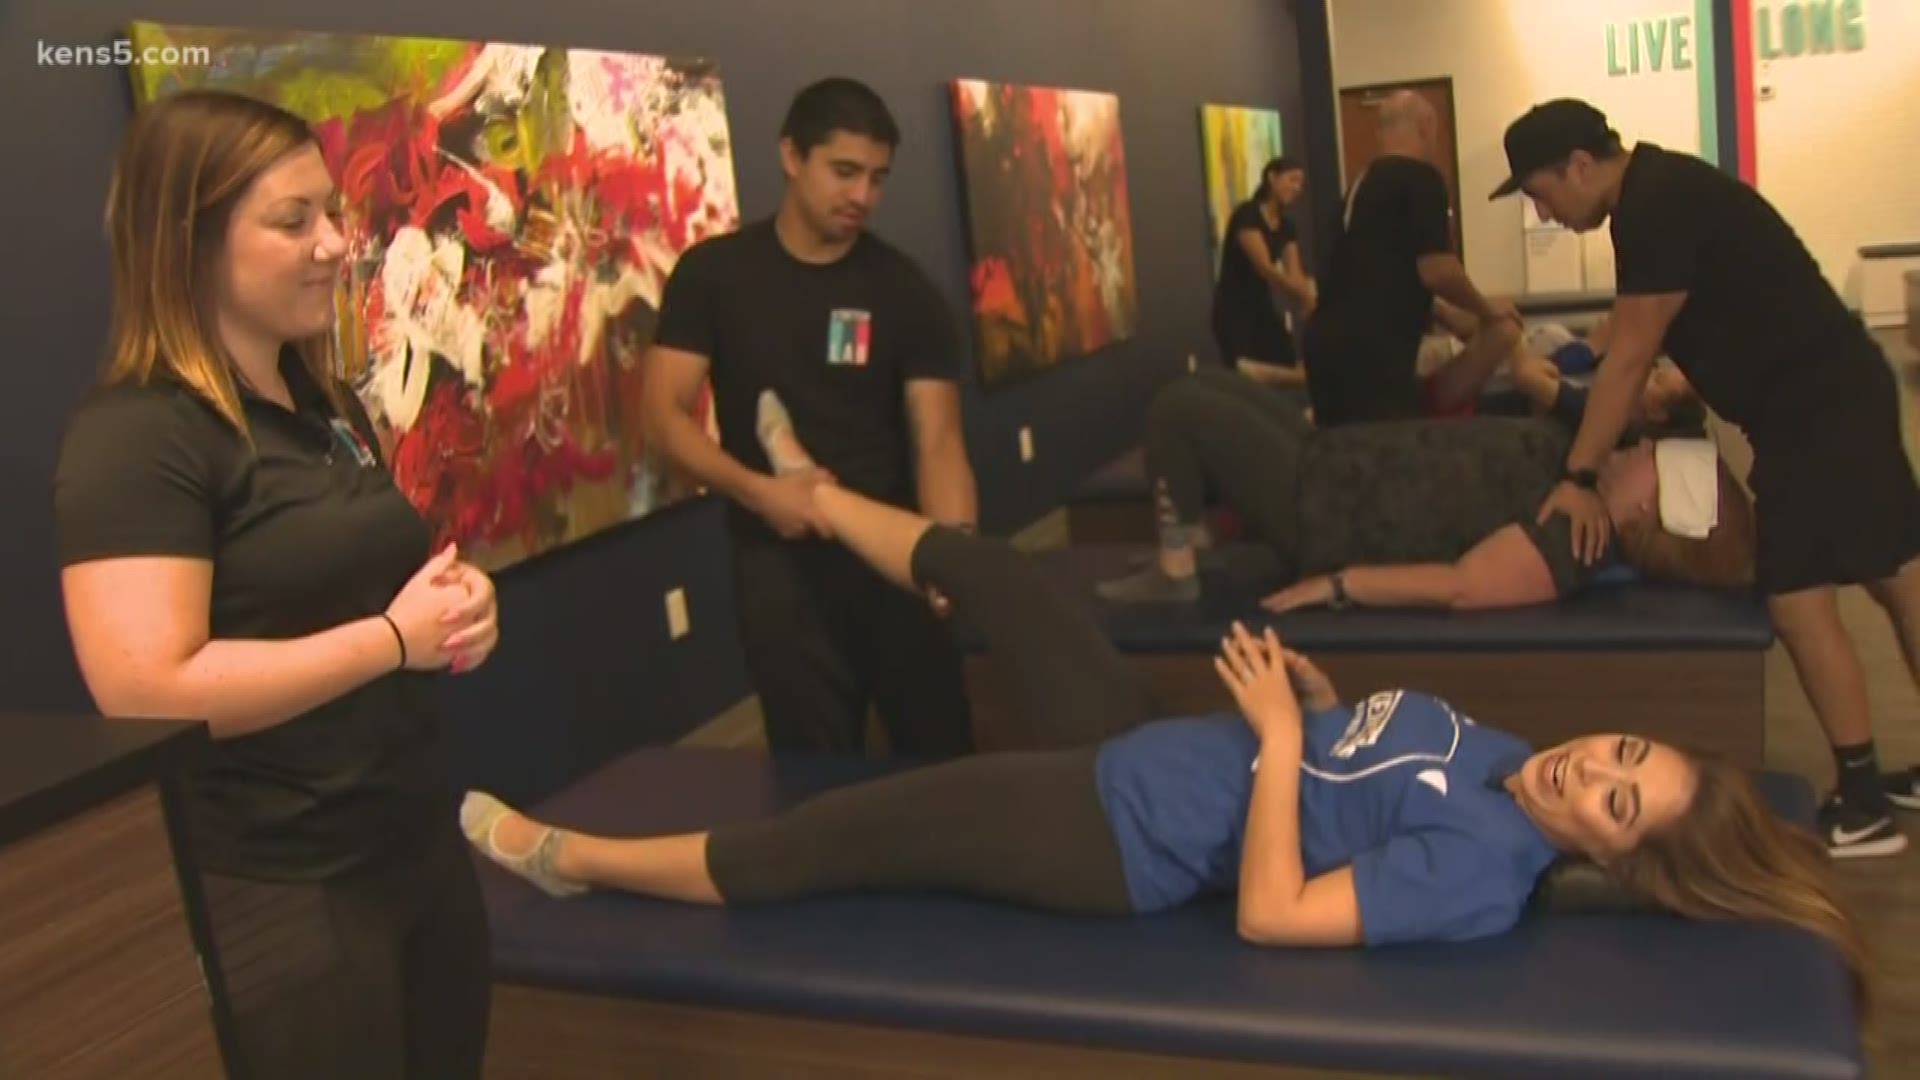 Looking to give your problems a good stretch? Audrey Castoreno stops by a new spot in town that promises to do just that-- the StretchLab.